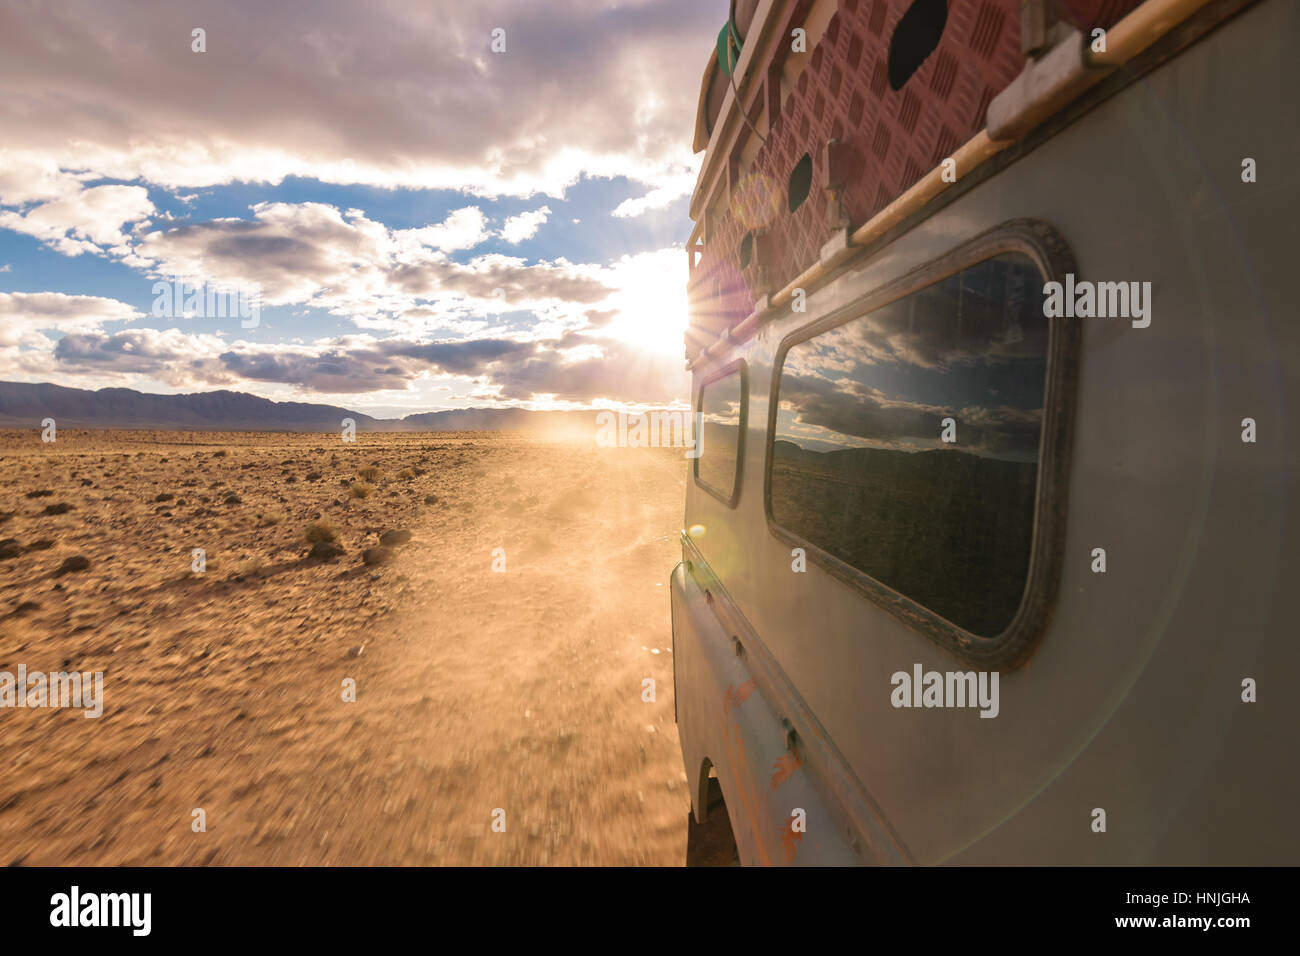 4x4 vehicle oldtimer driving off-road in Morocco Stock Photo